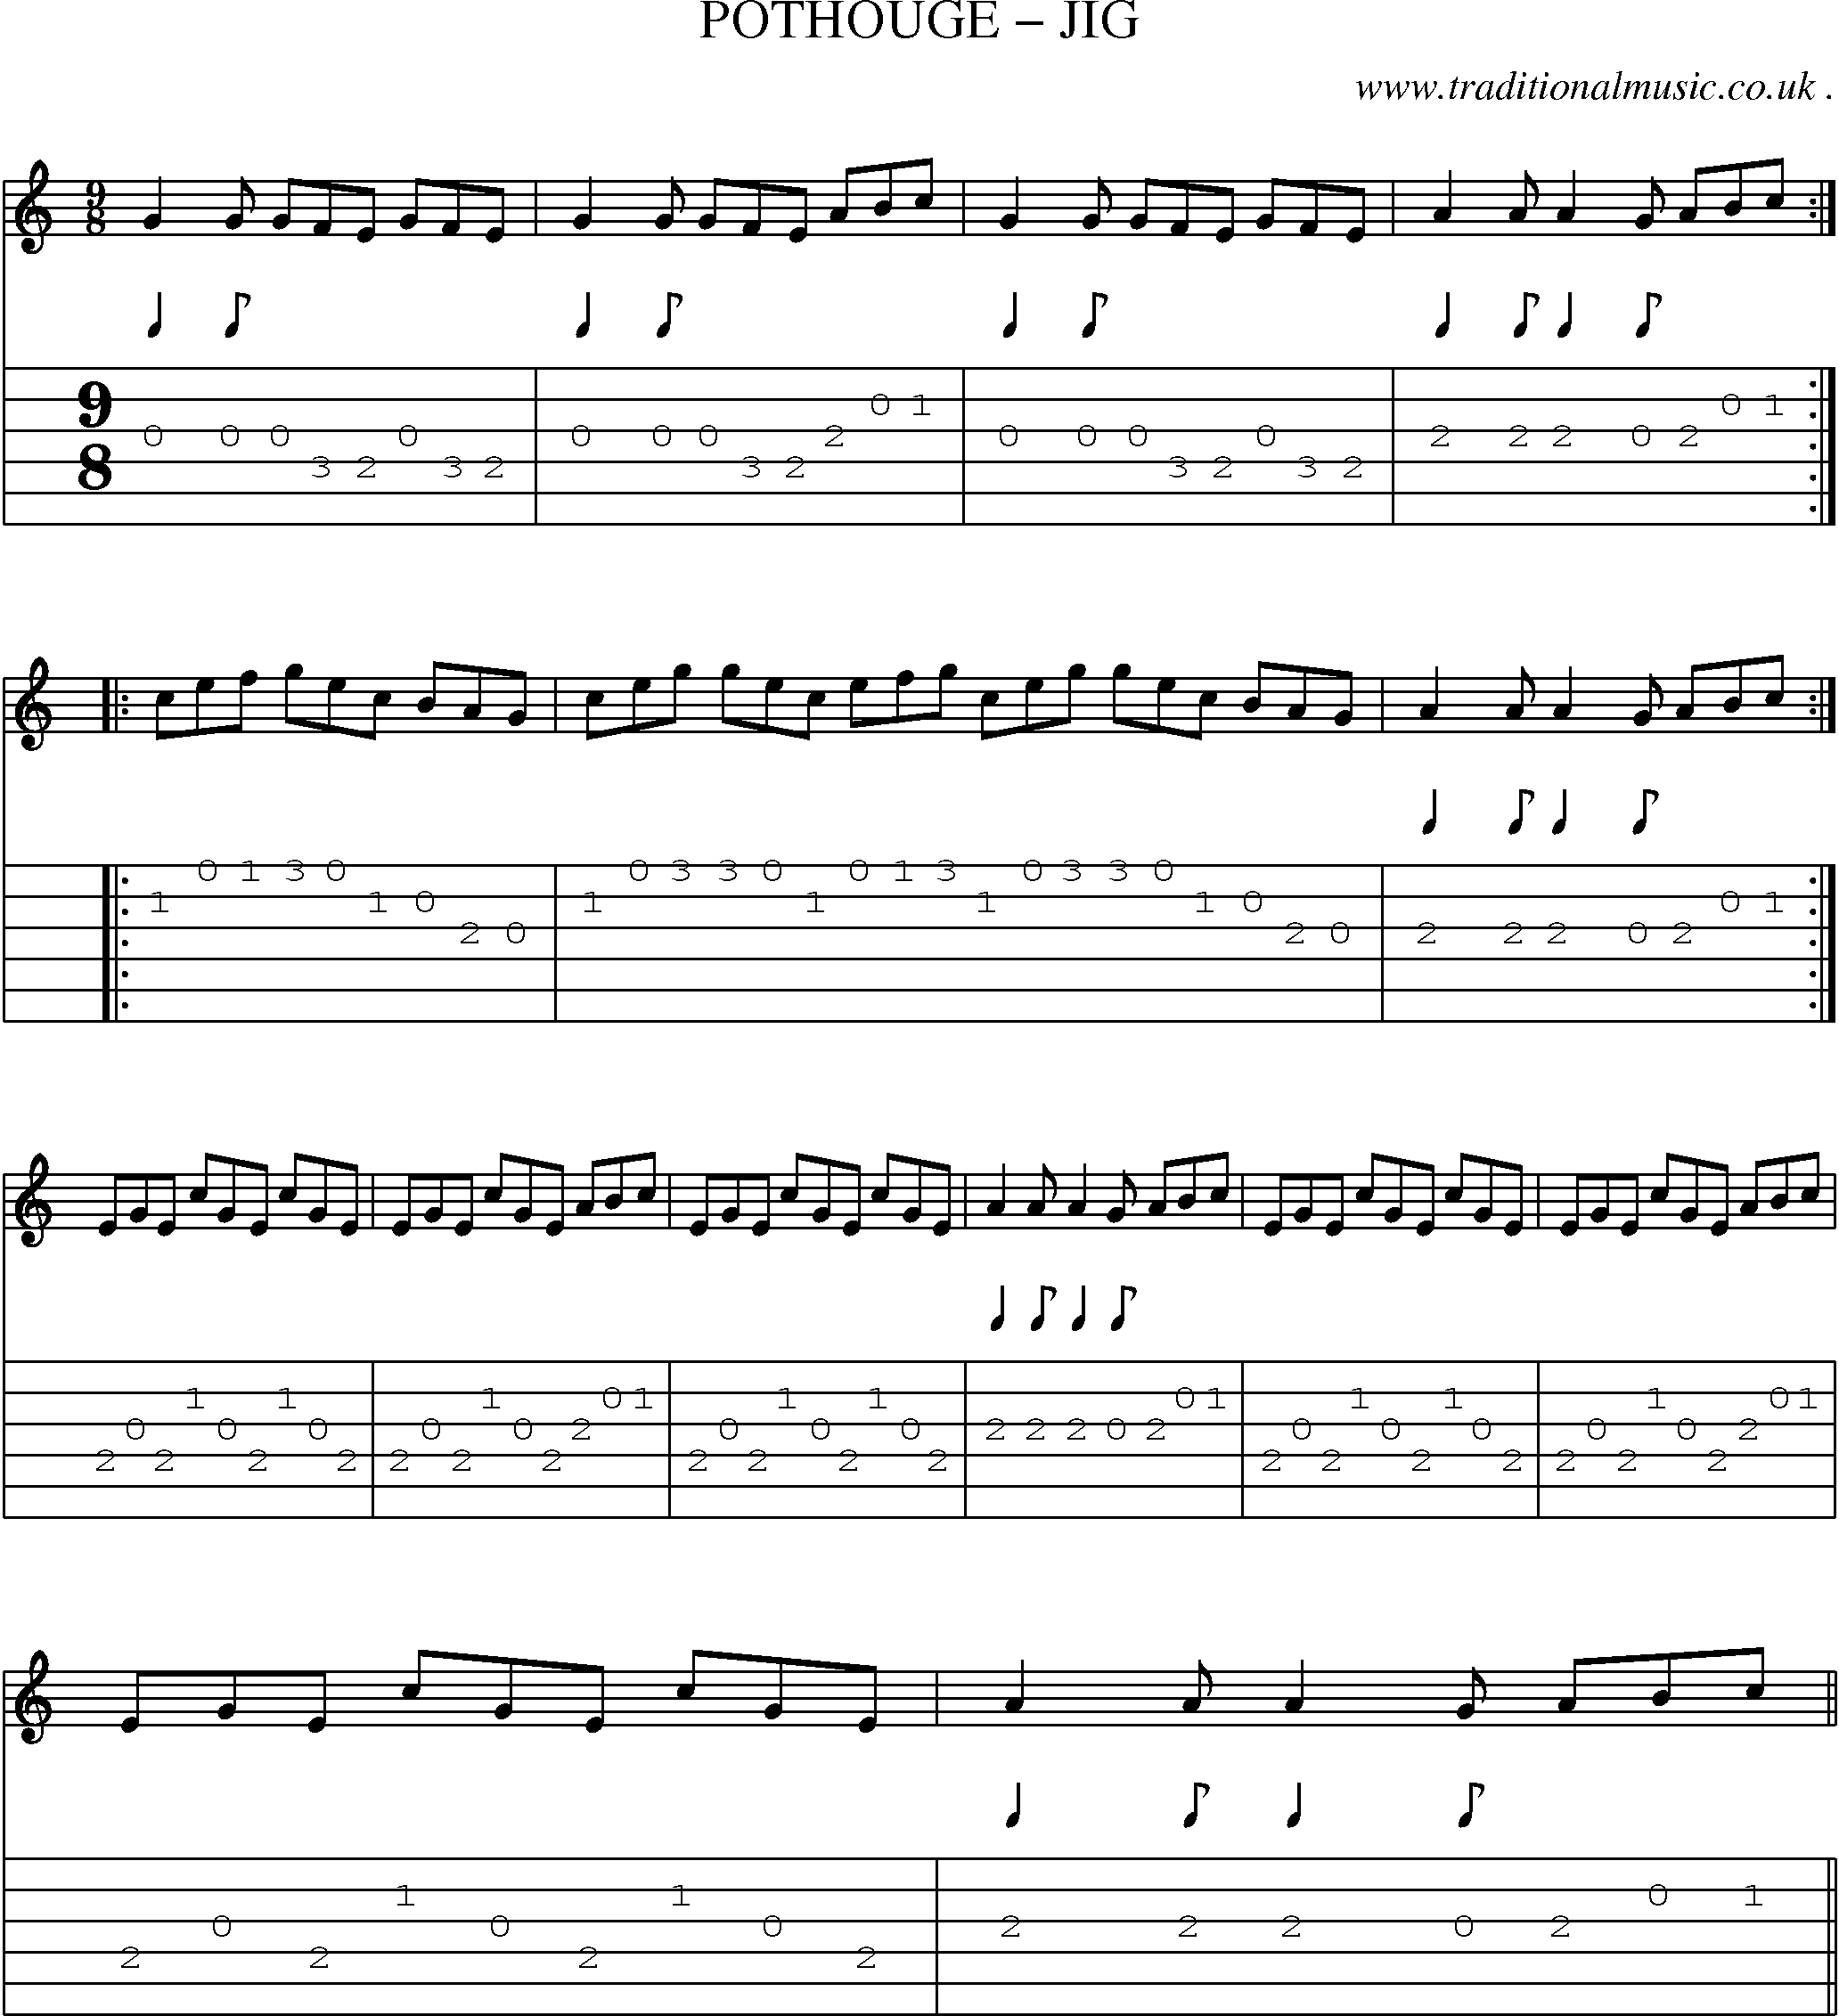 Sheet-Music and Guitar Tabs for Pothouge Jig